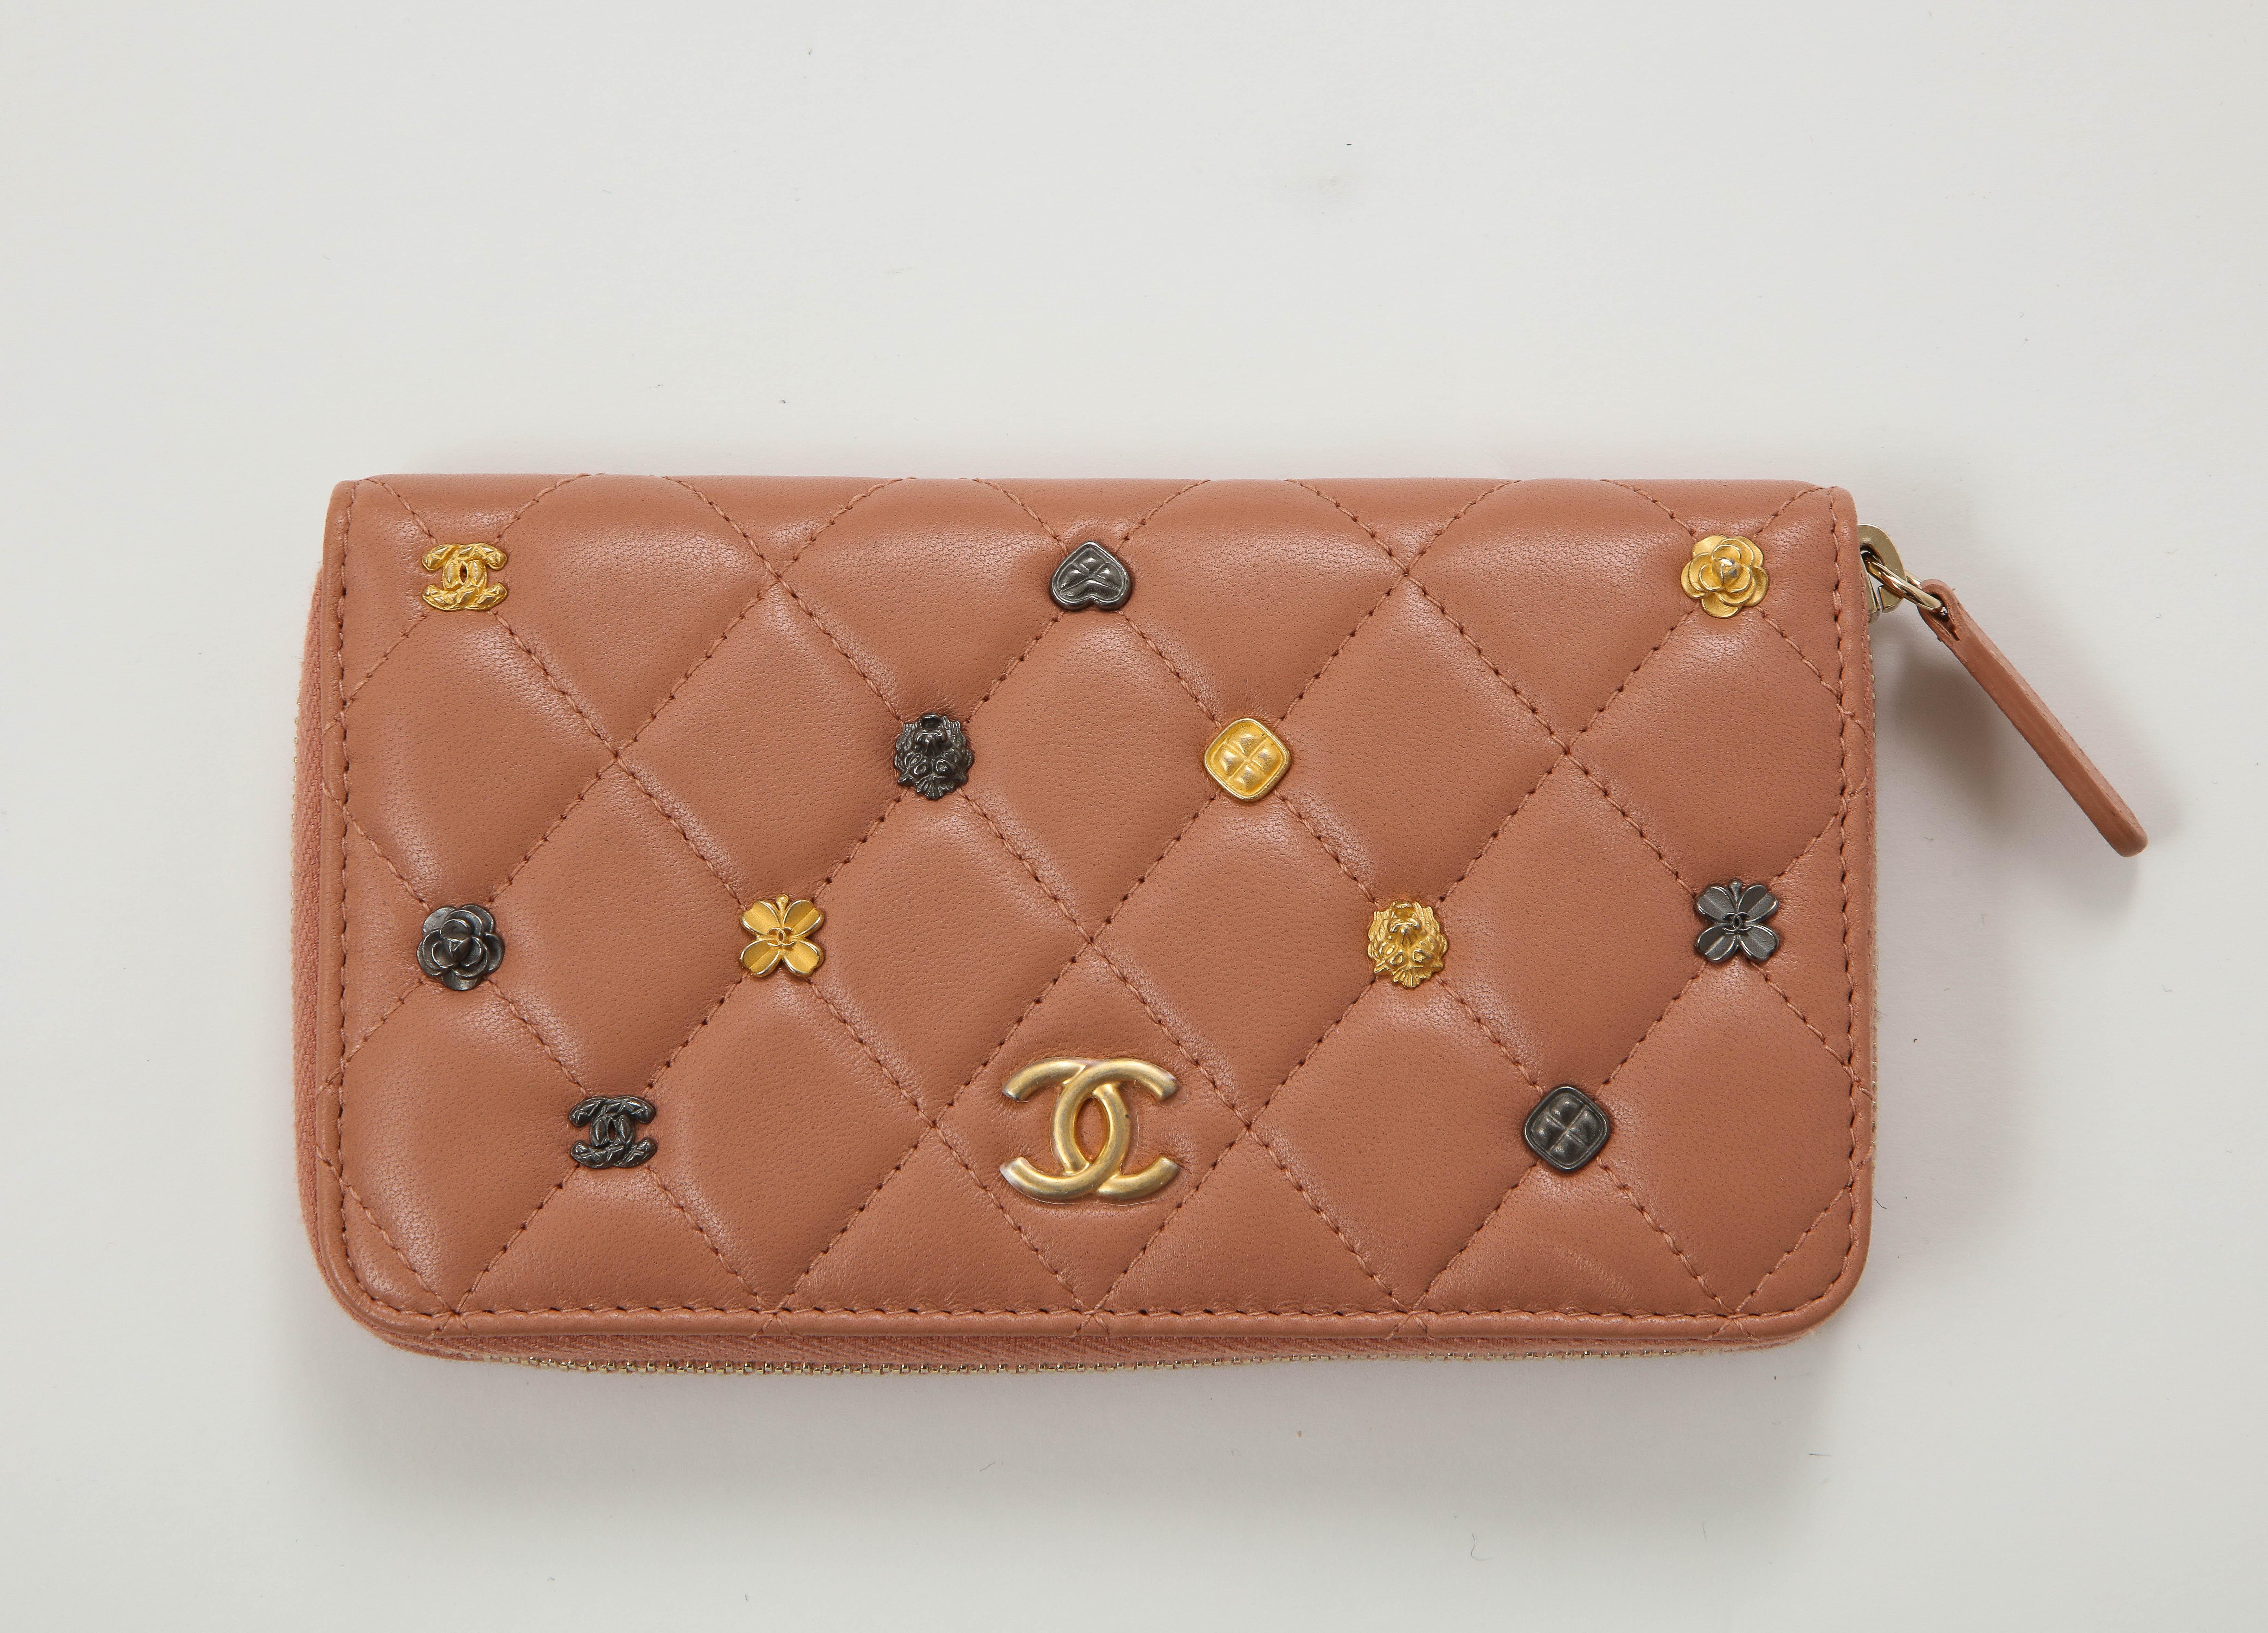 Iconic quilted diamond pattern wallet in a blush pink lambskin with miniature Chanel charms on front. 2 compartments with a center zippered pocket. New never carried, comes with box and storage bag.